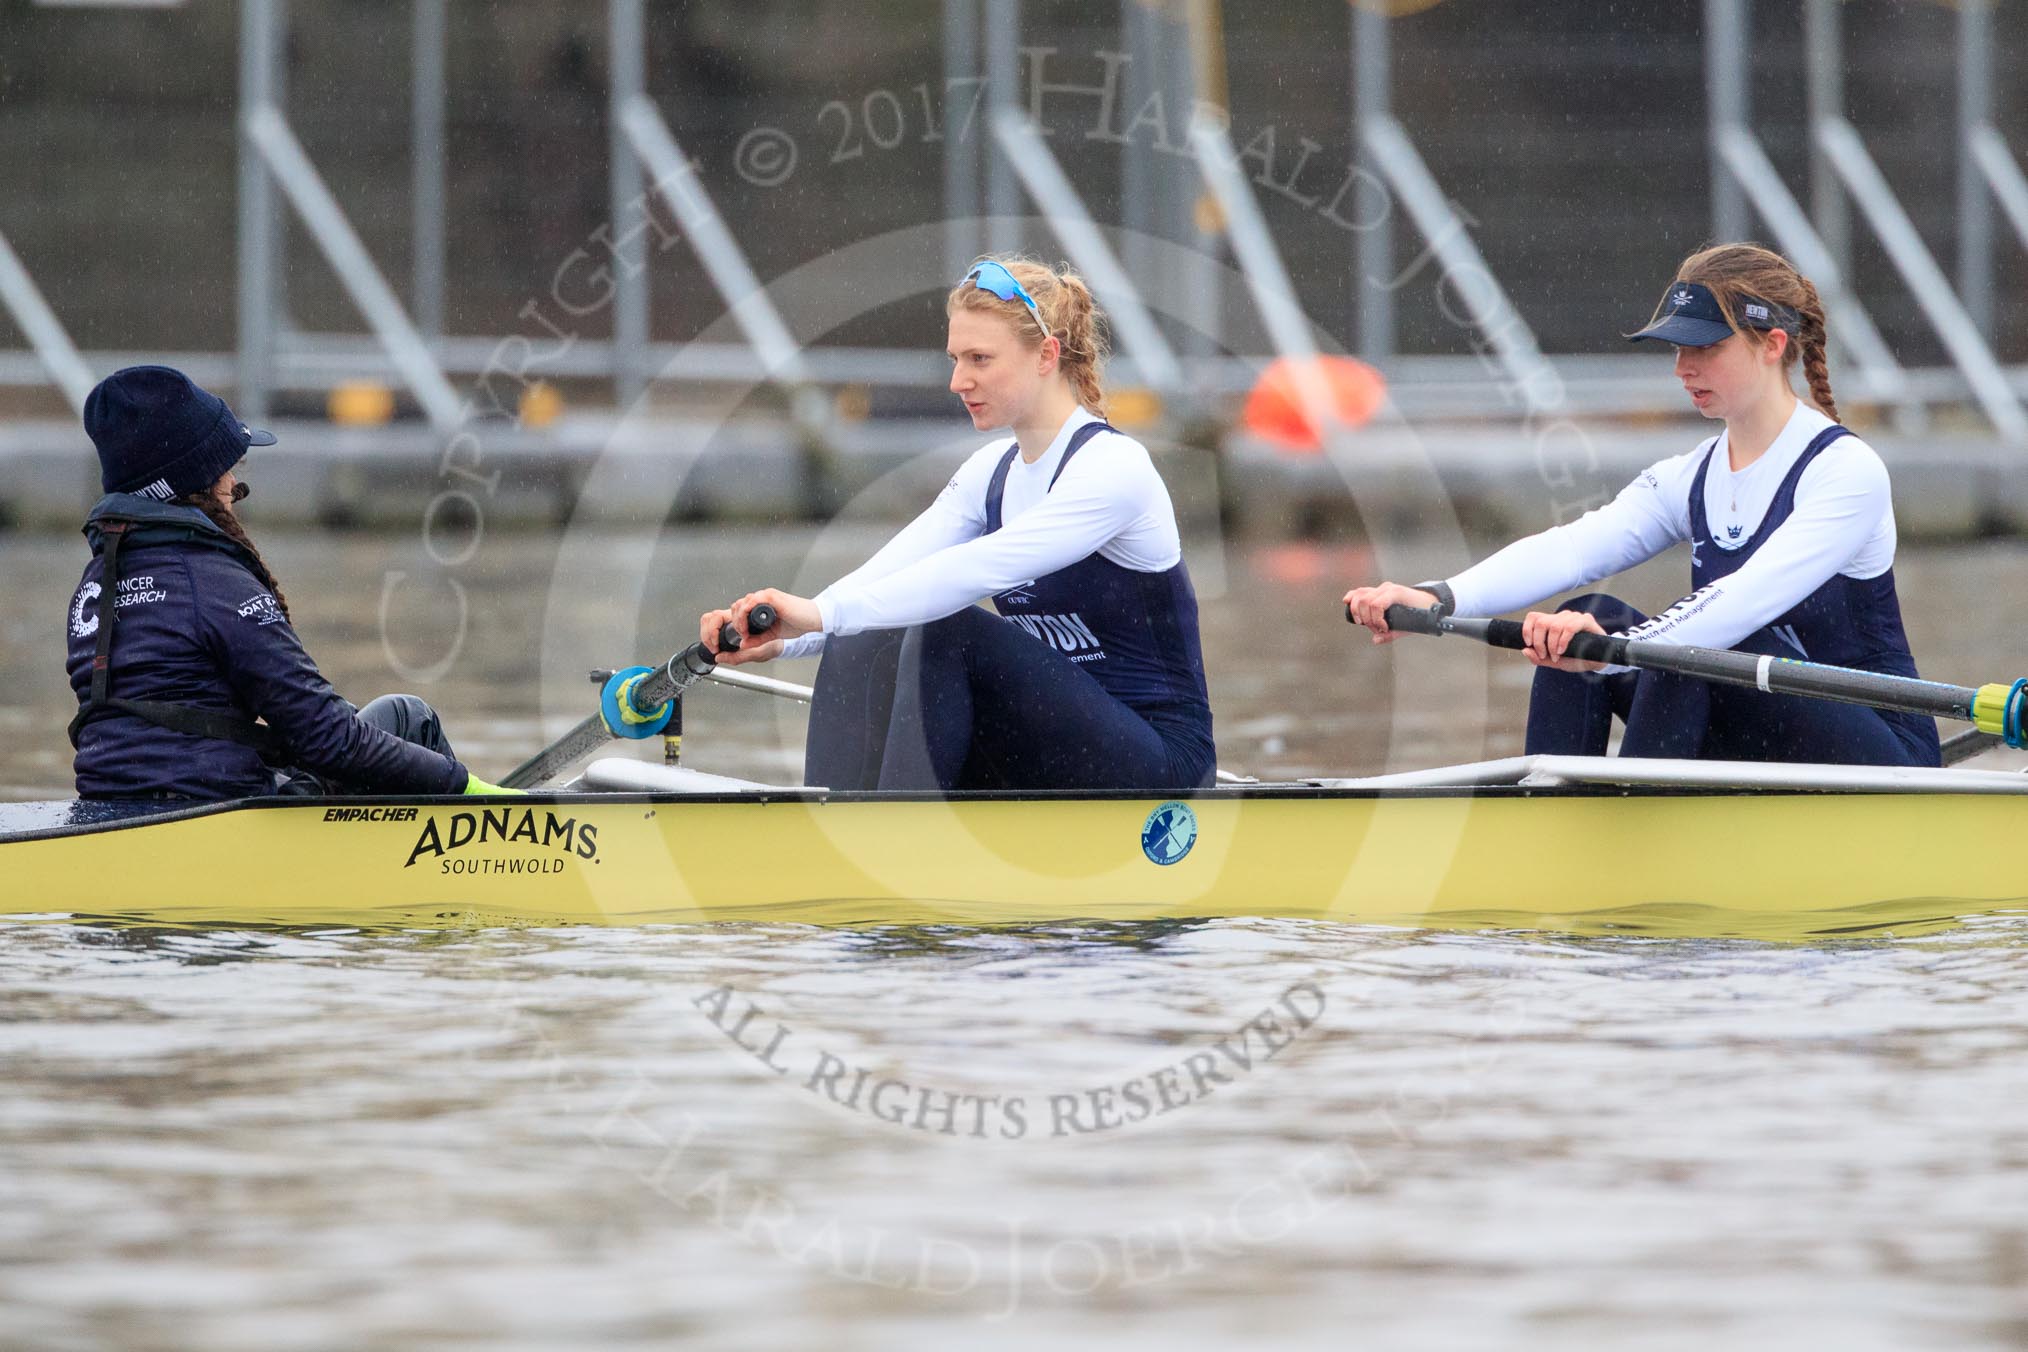 The Boat Race season 2018 - Women's Boat Race Trial Eights (OUWBC, Oxford): "Coursing River" waiting for the race to be started - cox Ellie Shearer, stroke Beth Bridgman, 7 Juliette Perry.
River Thames between Putney Bridge and Mortlake,
London SW15,

United Kingdom,
on 21 January 2018 at 14:27, image #47